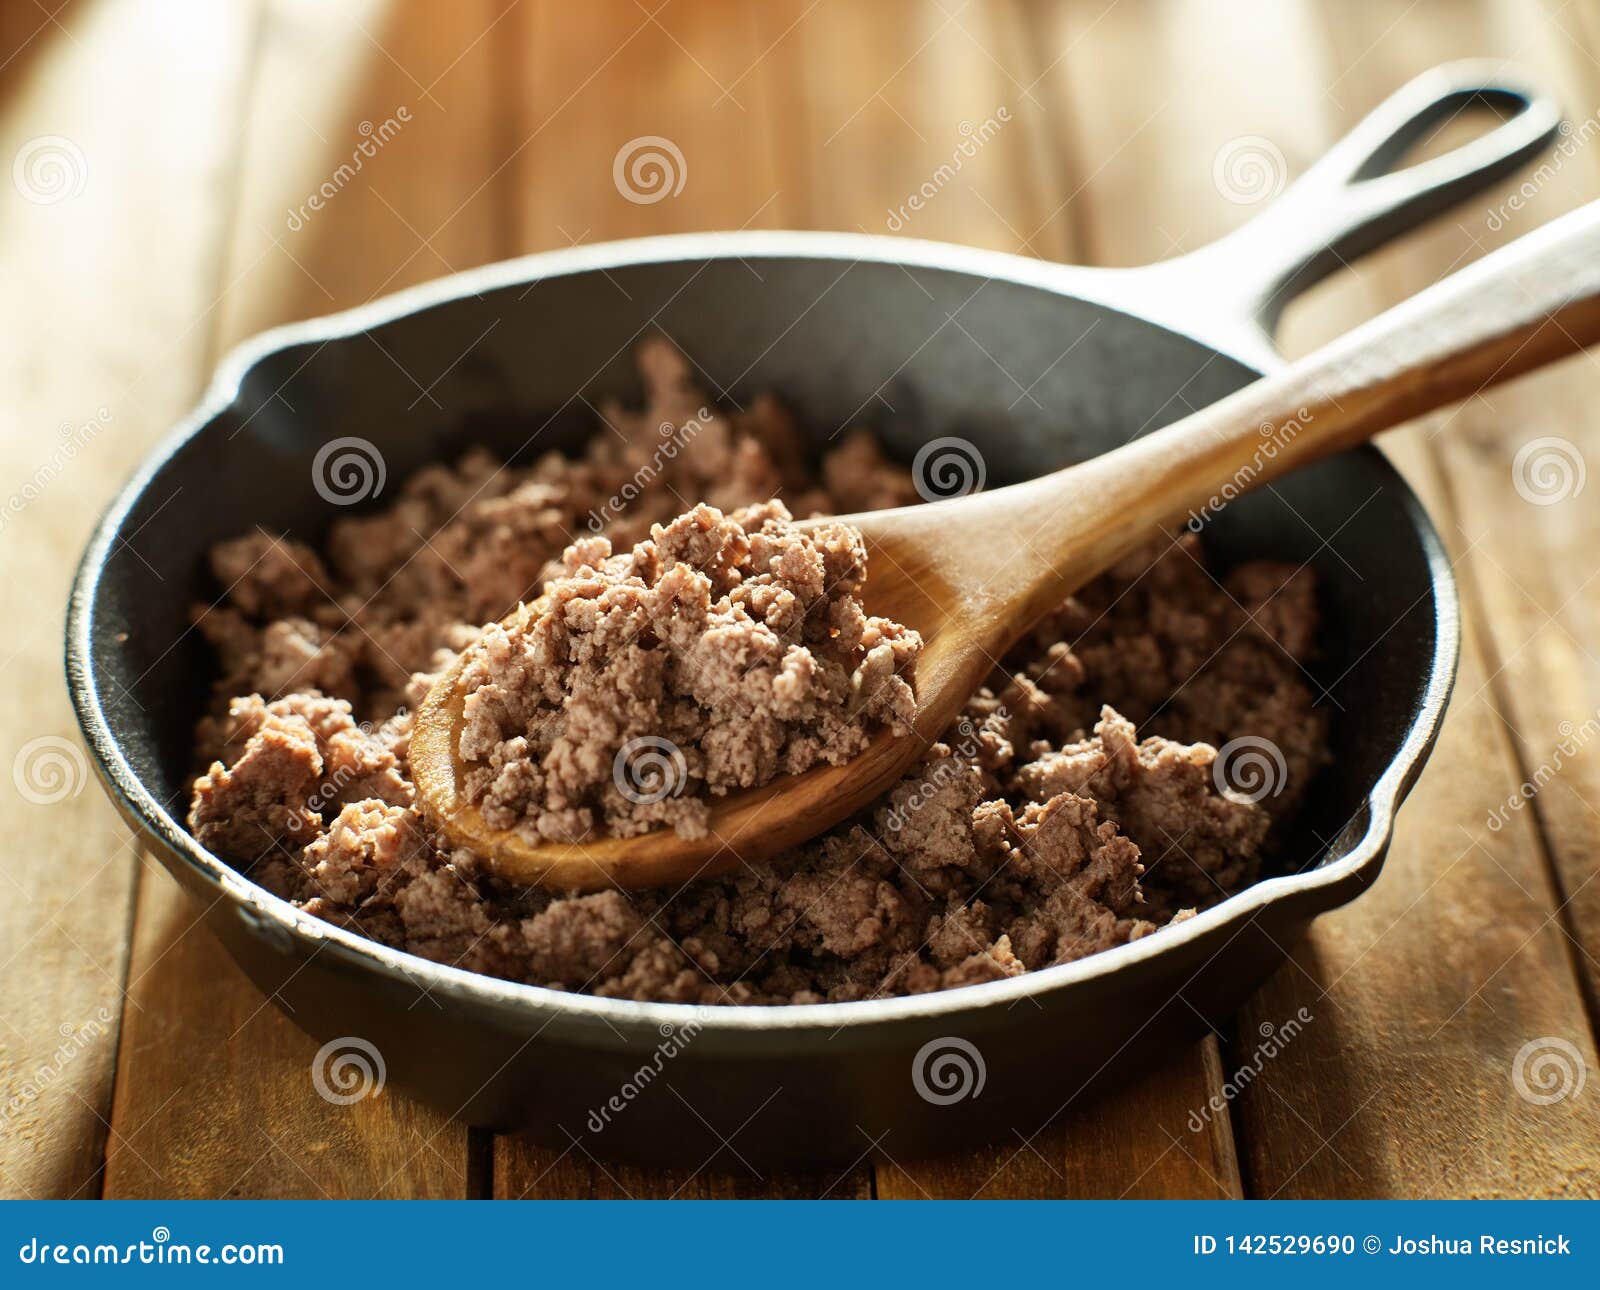 spoonful of freshly cooked ground beef from iron skillet